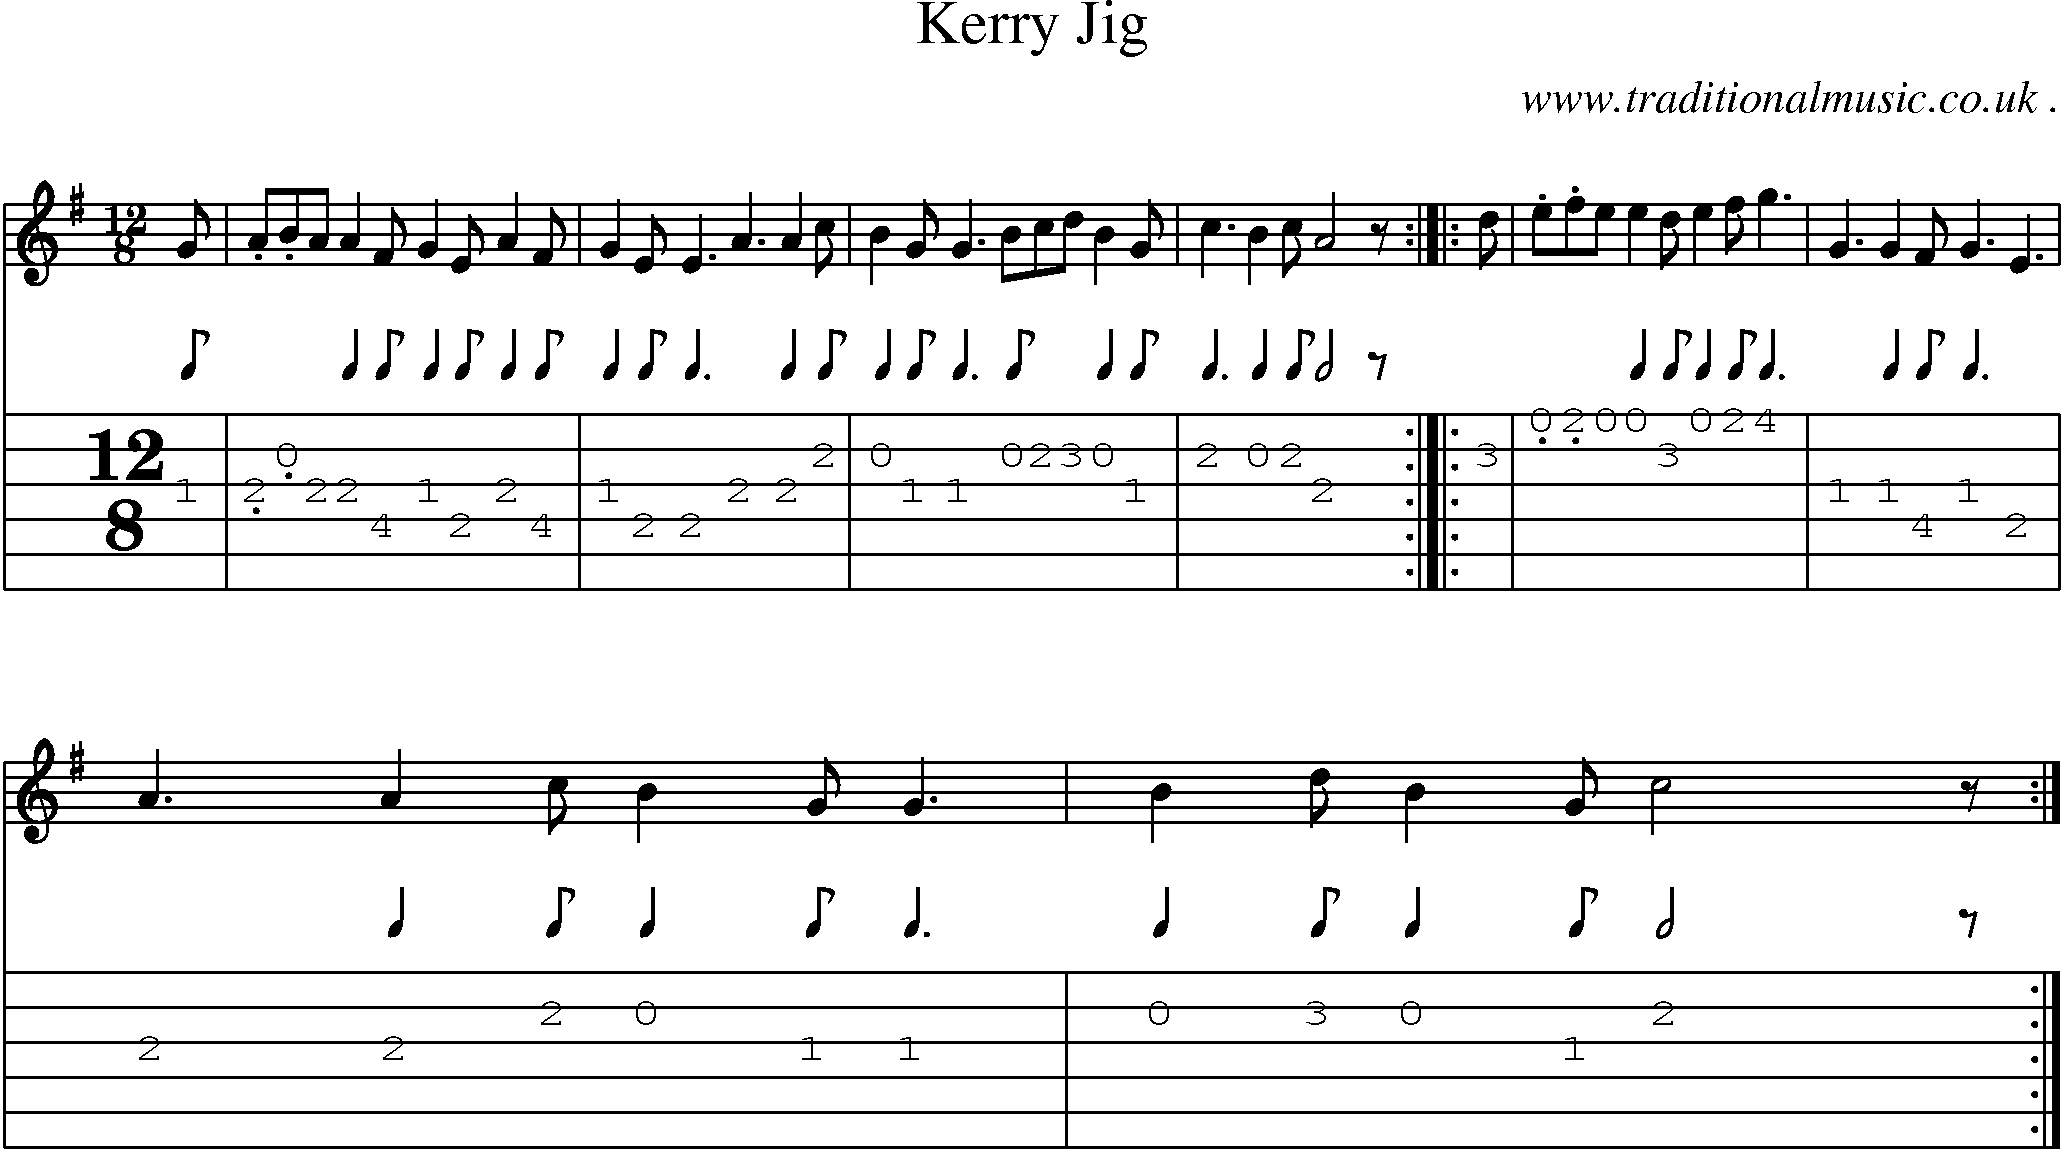 Sheet-Music and Guitar Tabs for Kerry Jig